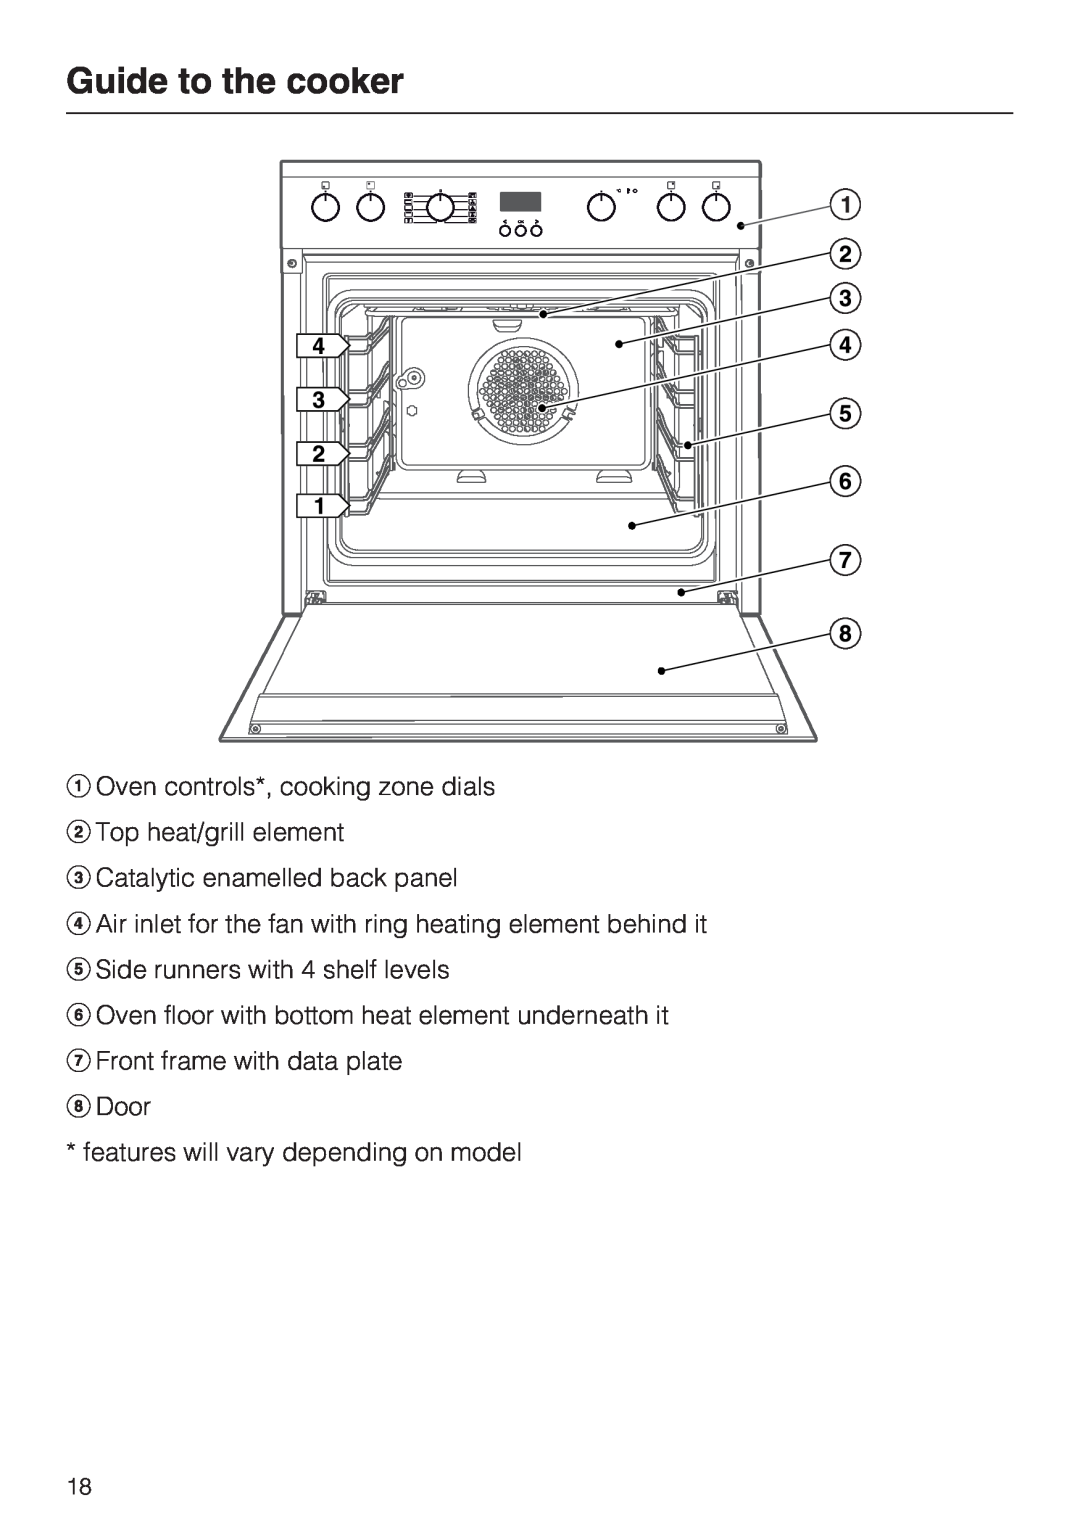 Miele 10 102 470 installation instructions Guide to the cooker, Oven controls*, cooking zone dials, Top heat/grill element 